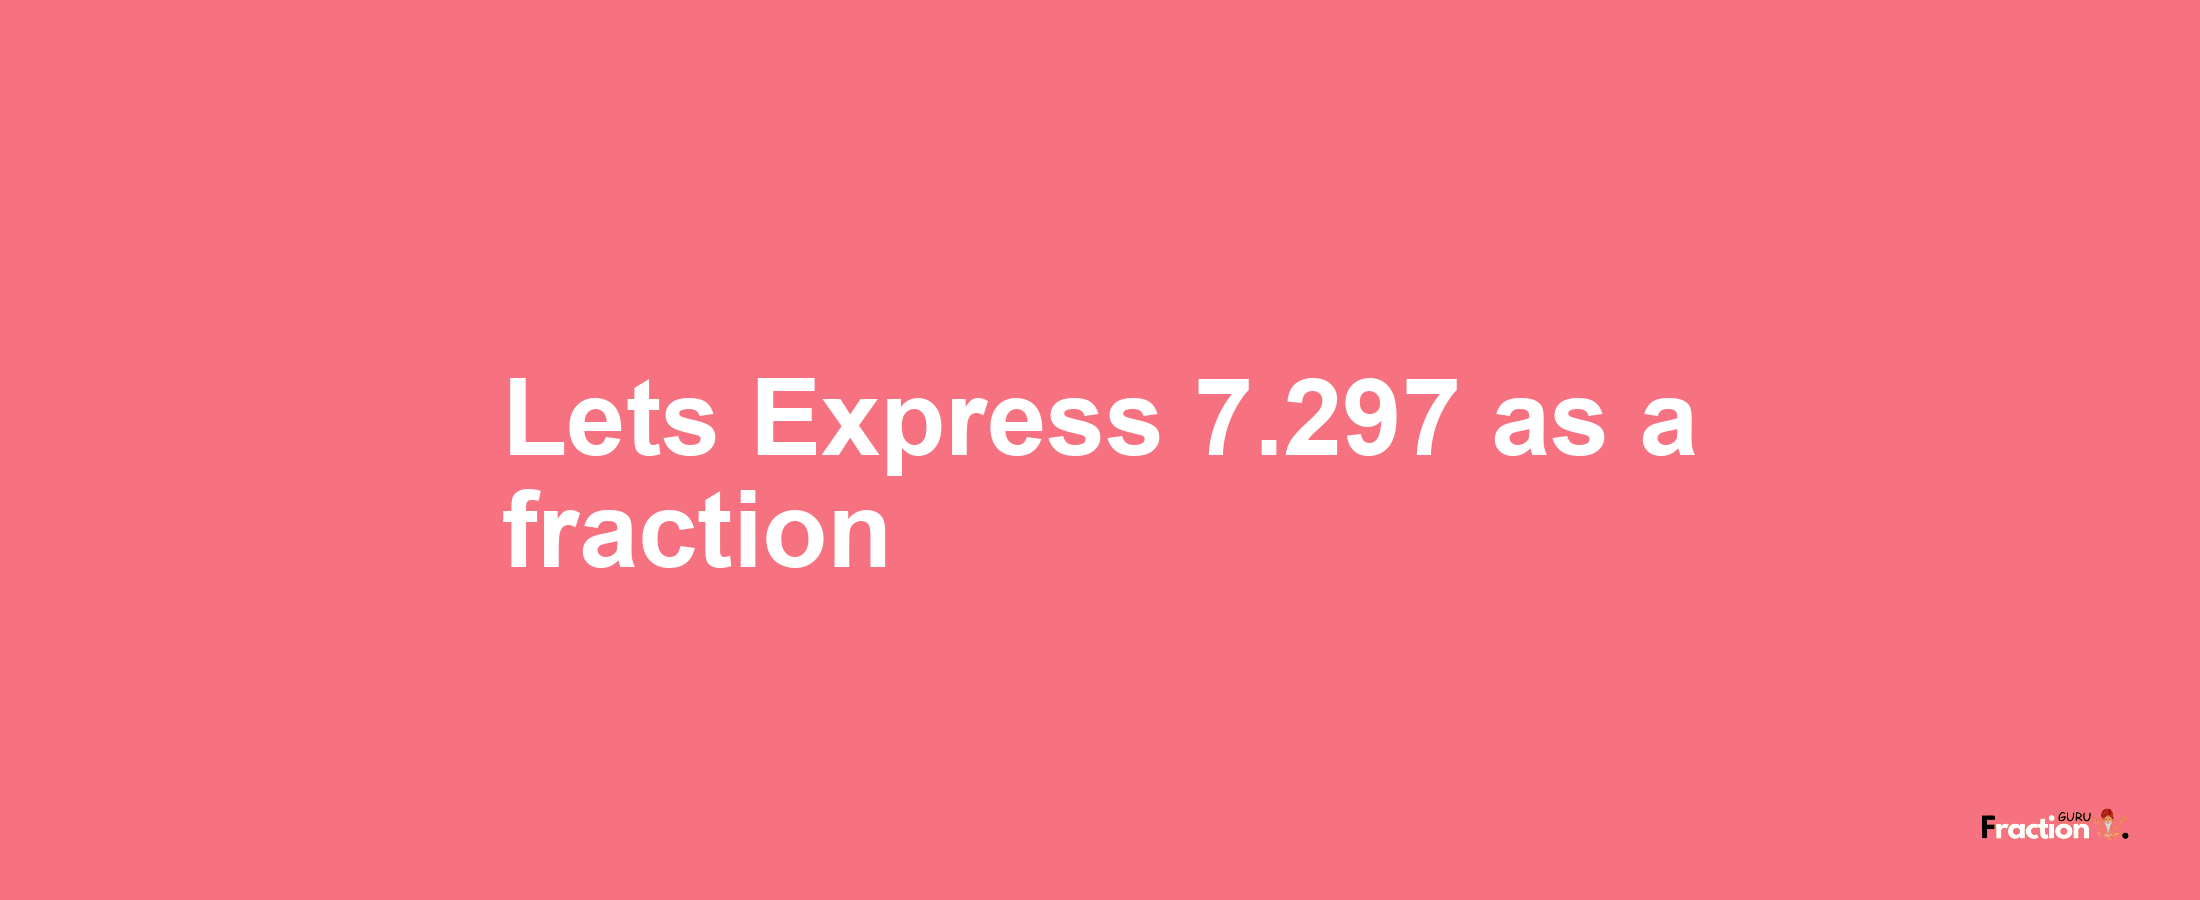 Lets Express 7.297 as afraction